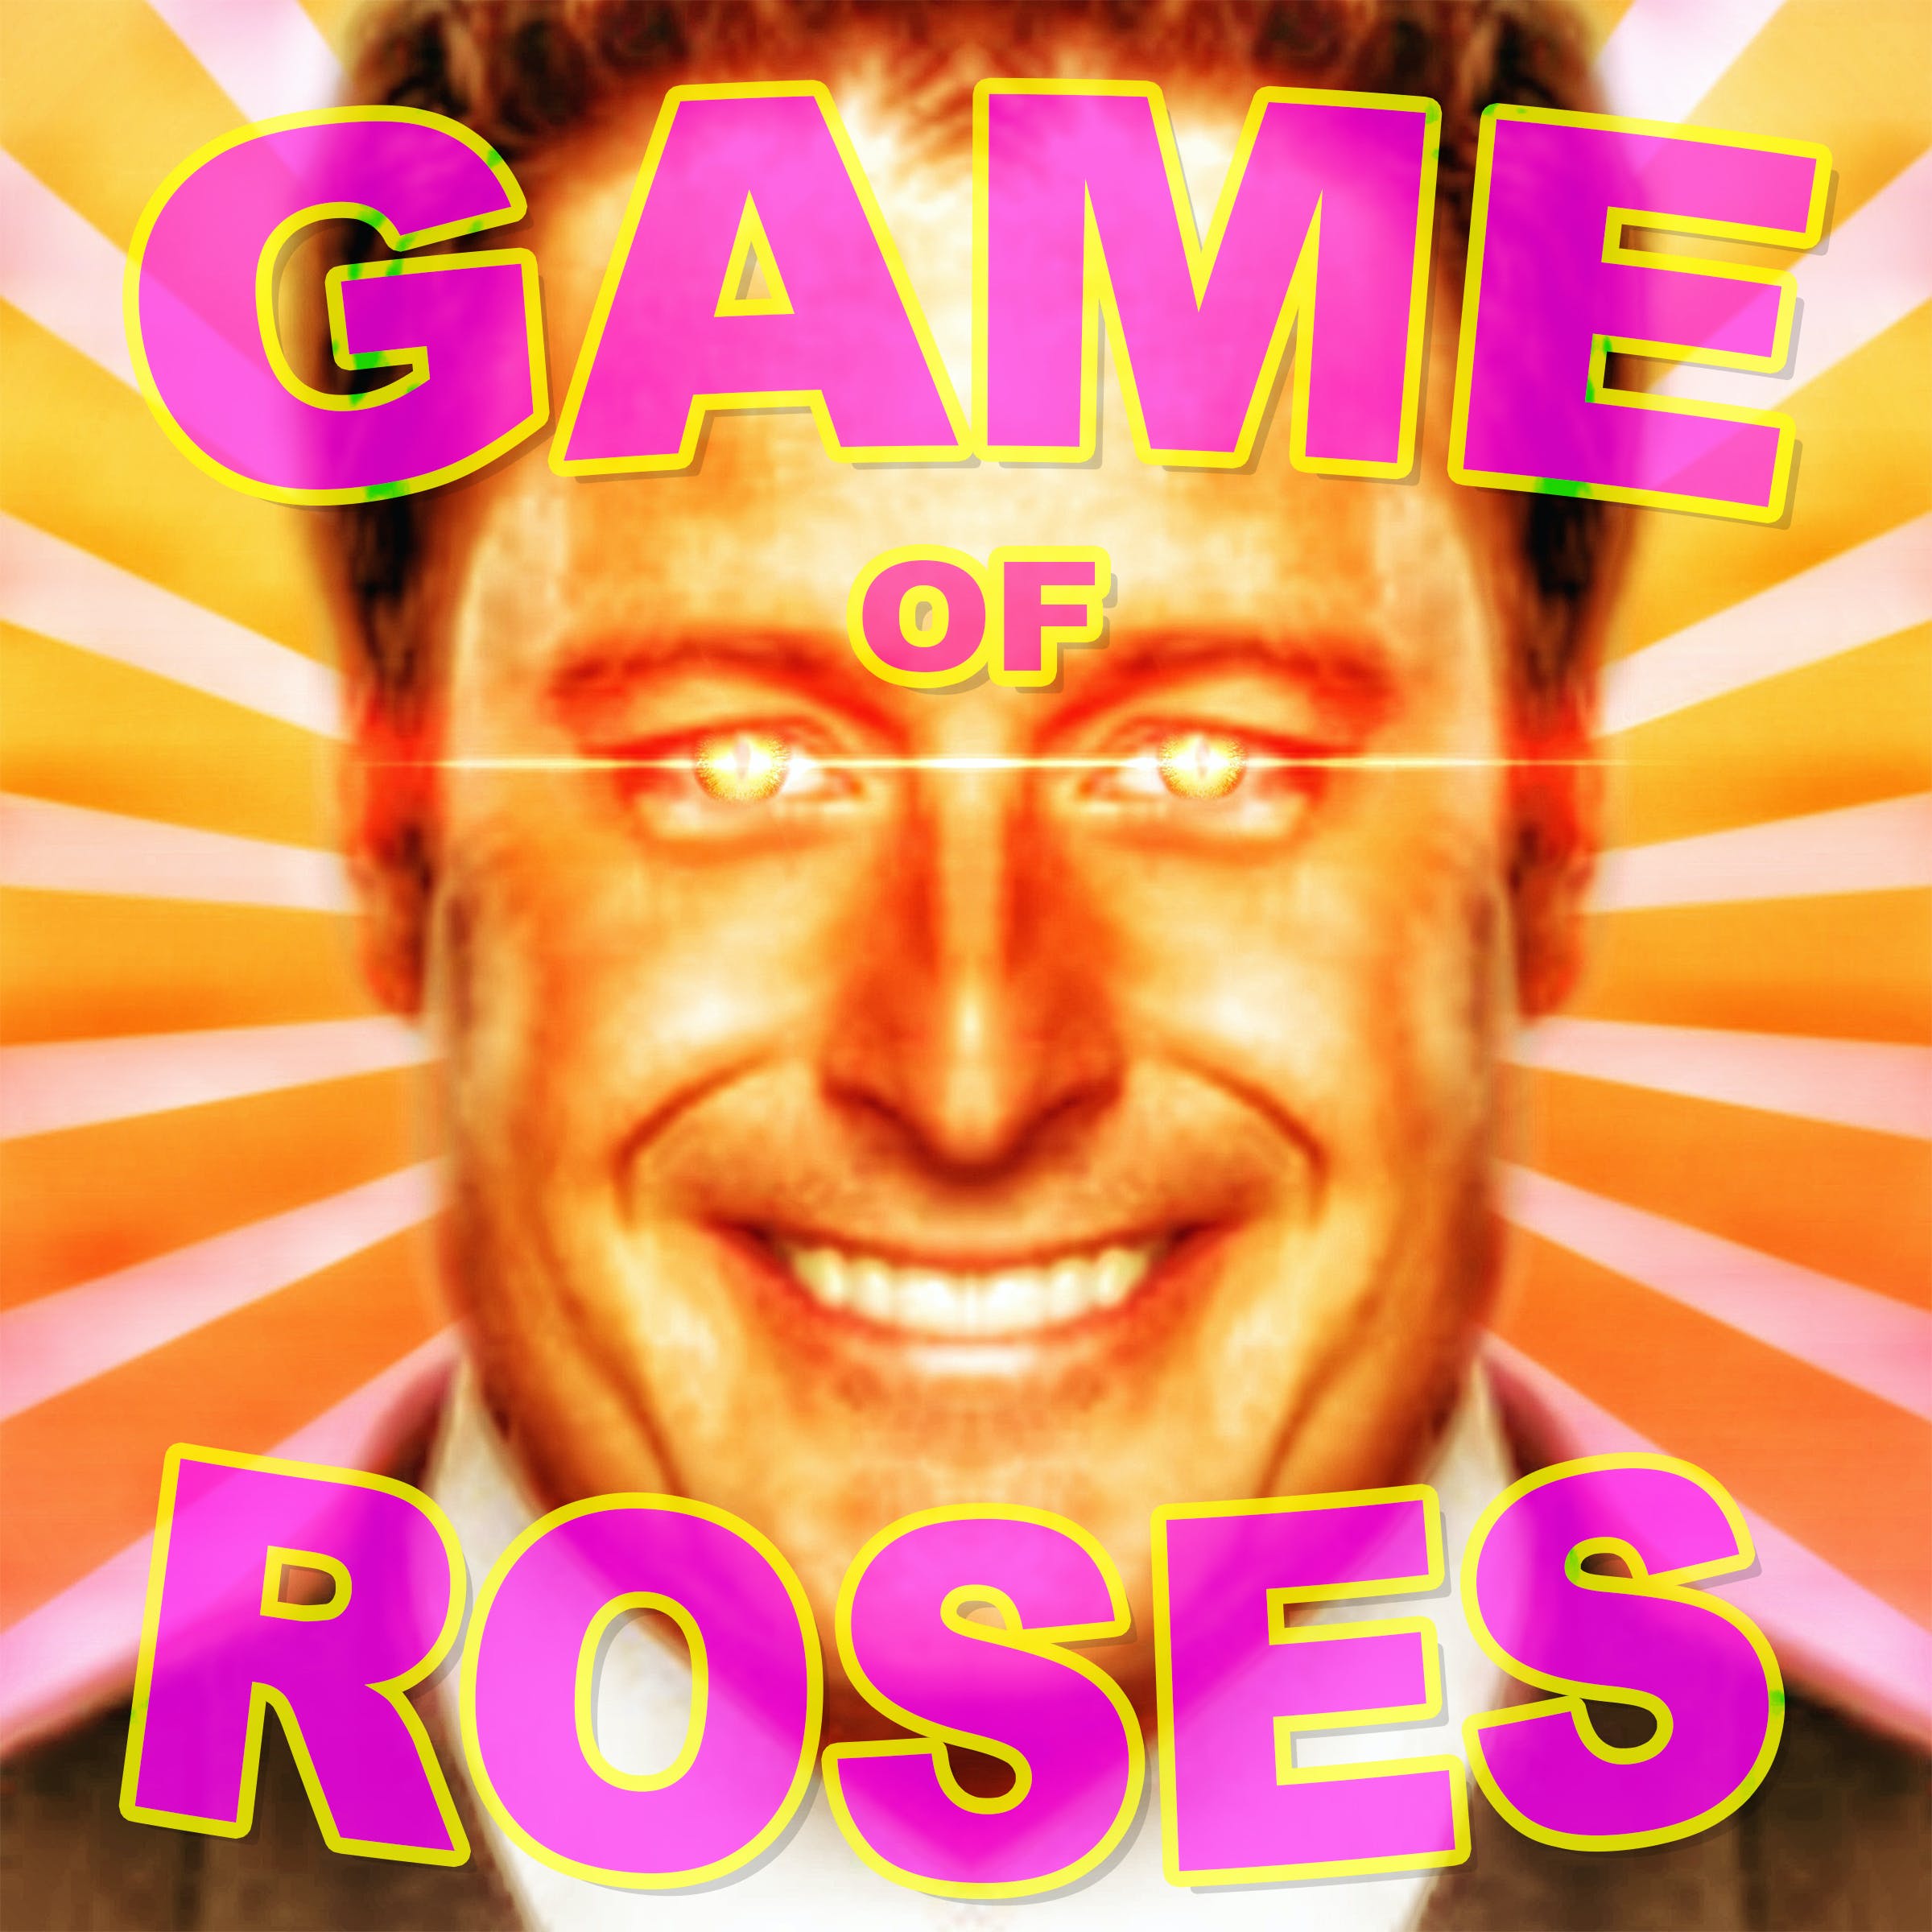 Game of Roses: Lexicon Vol. 2